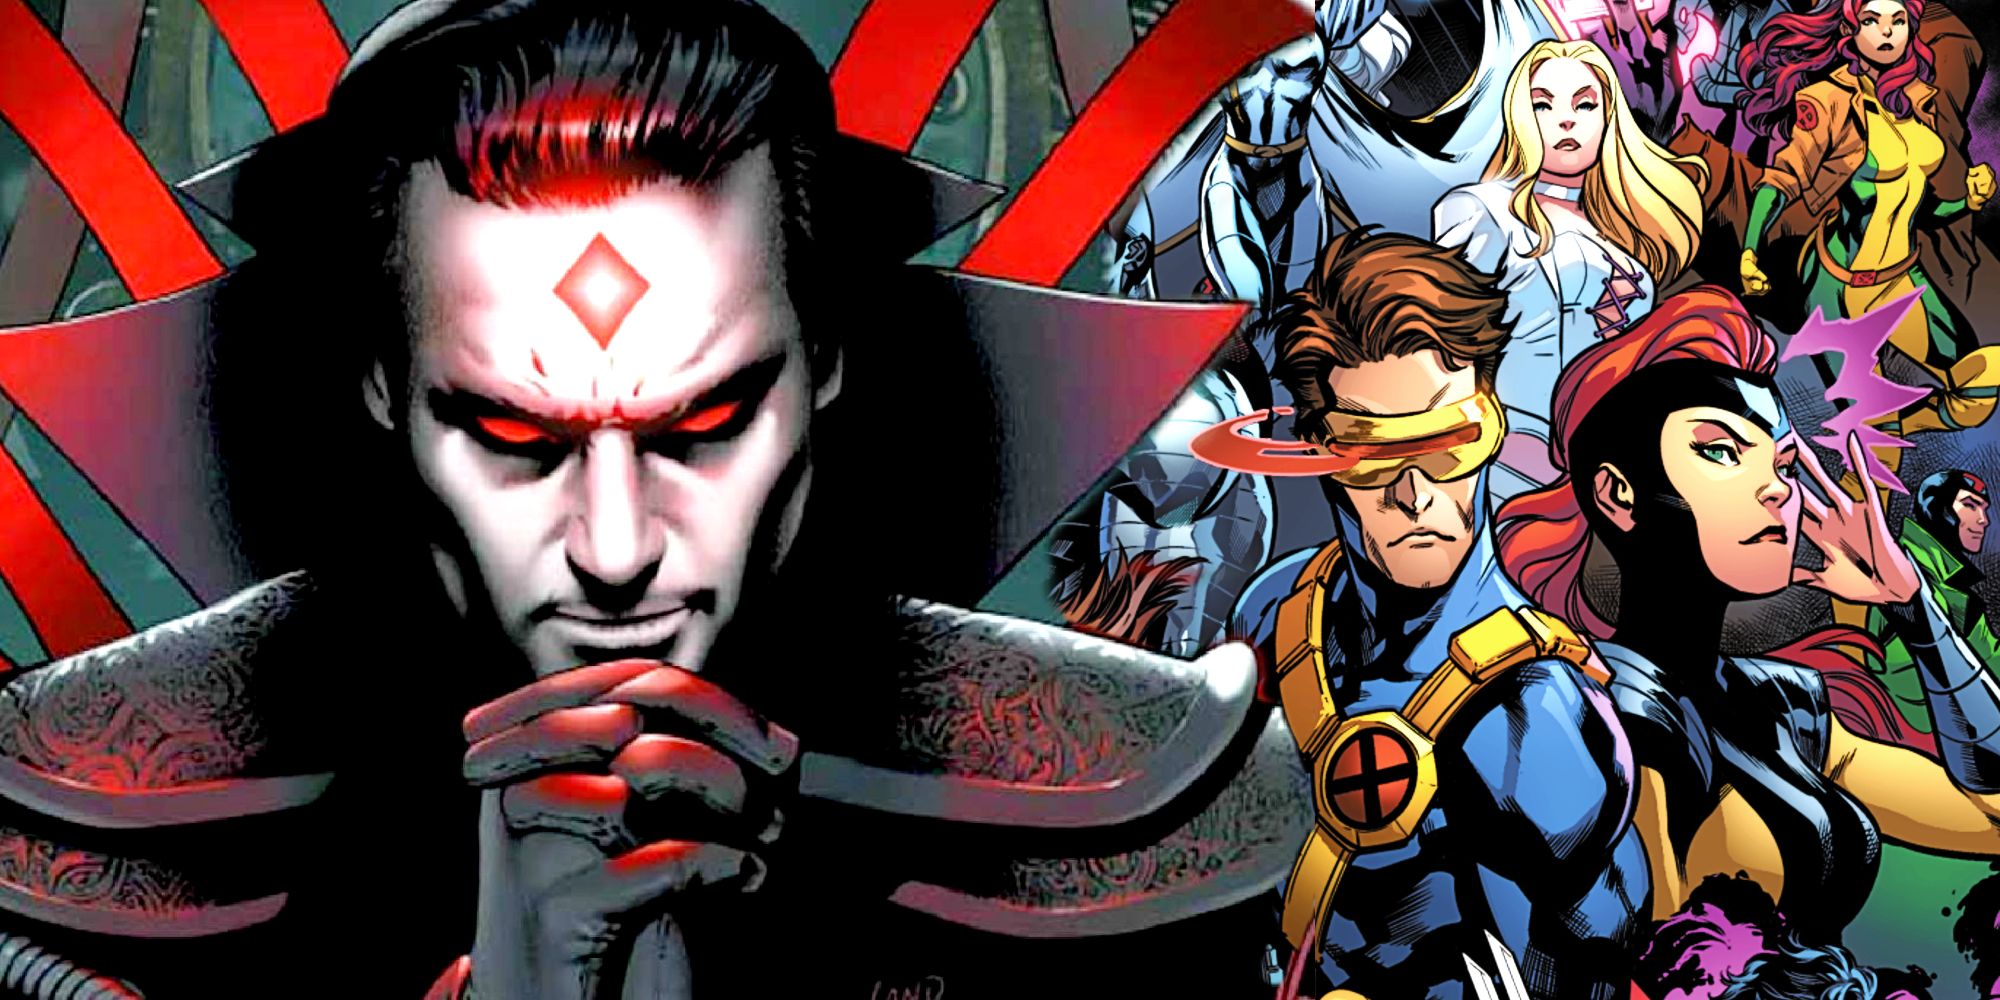 Mister Sinister and the X-Men in Marvel Comics